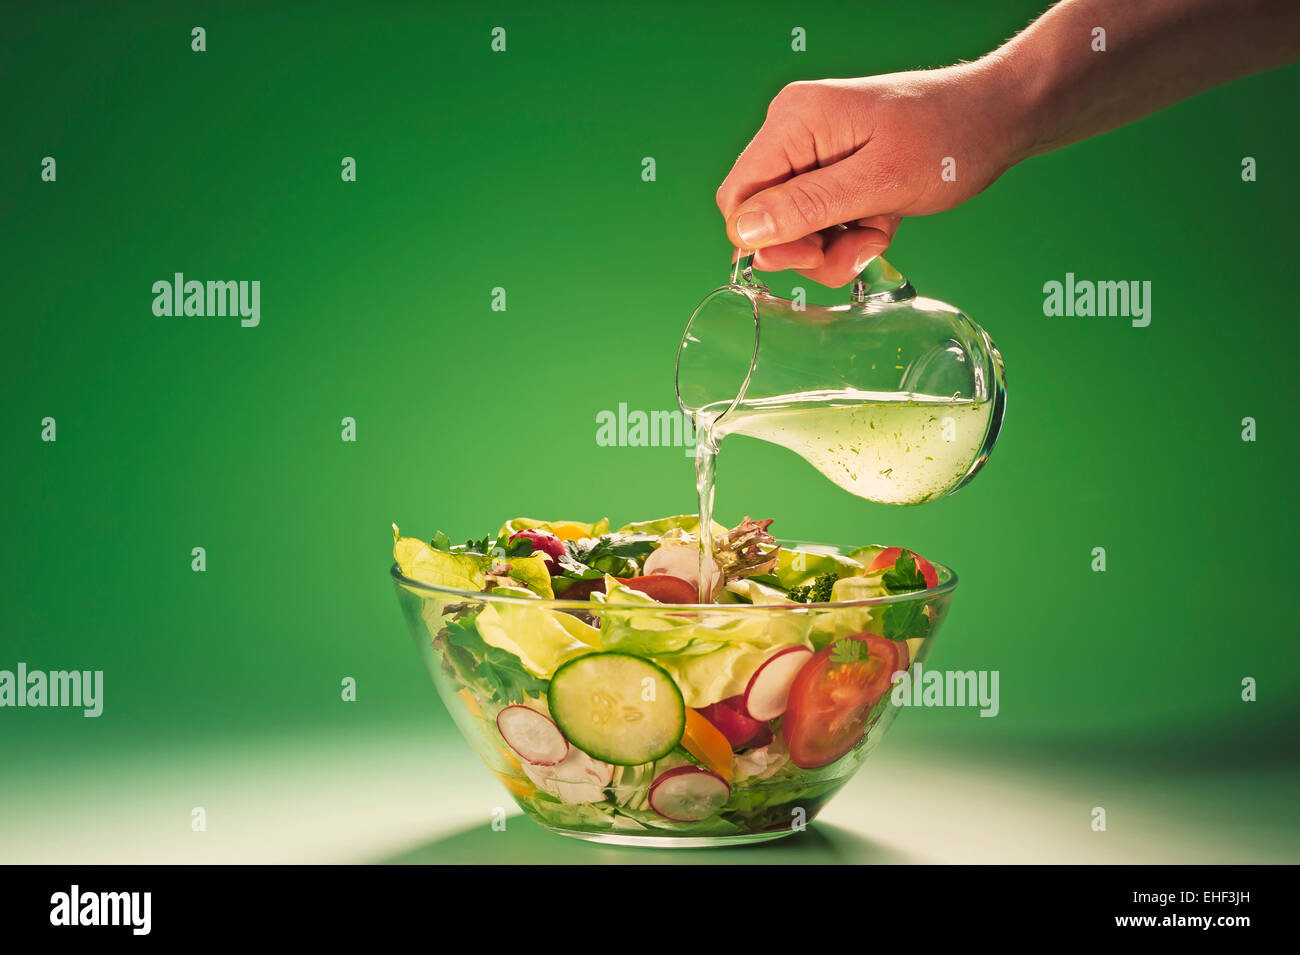 Hand pouring herbal vinegar into a bowl filled with salad Stock Photo